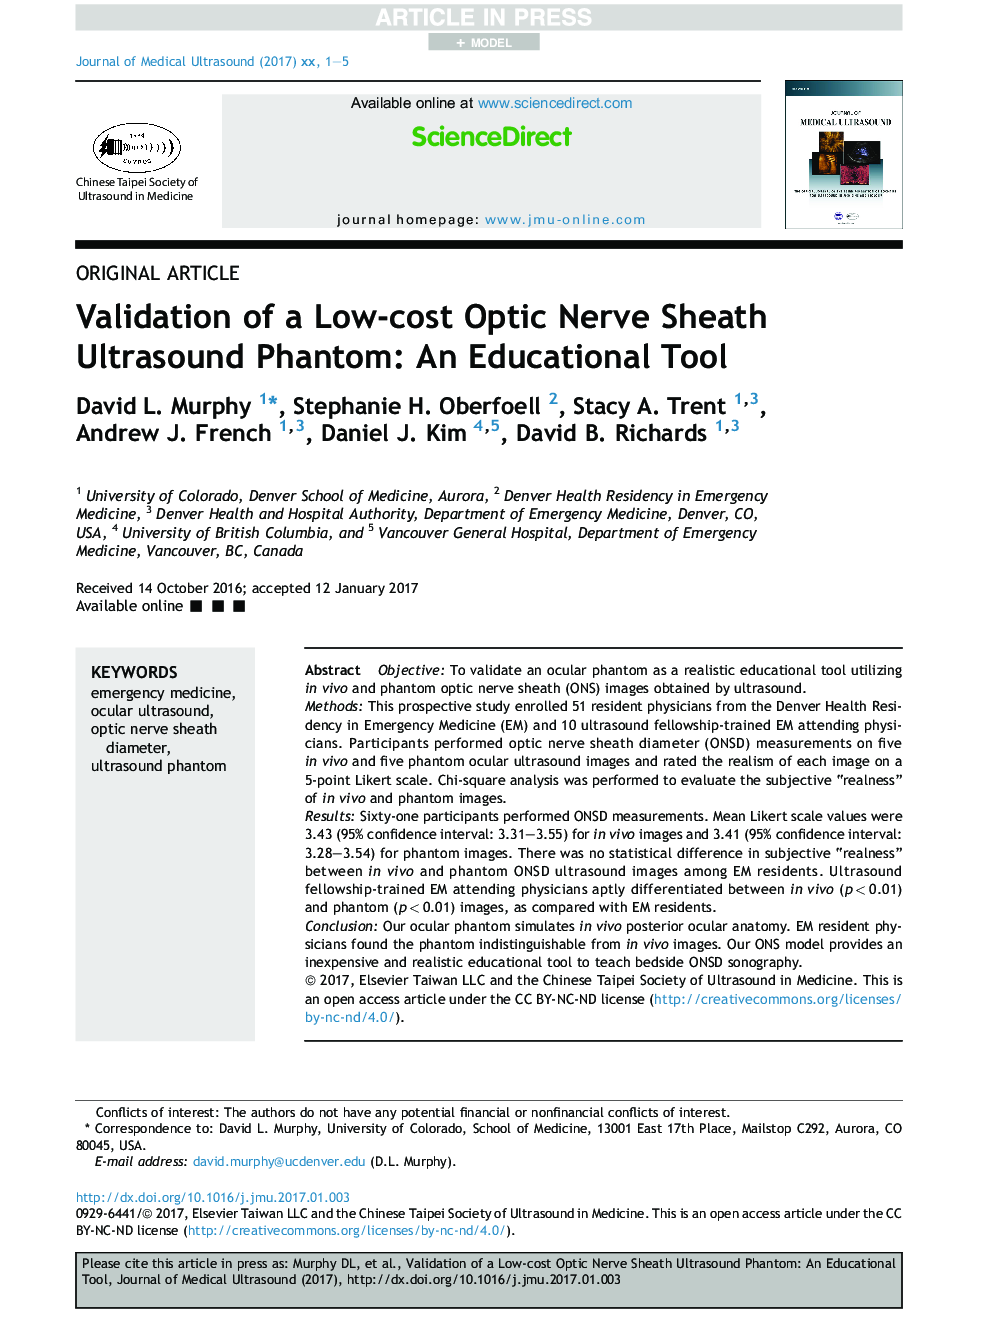 Validation of a Low-cost Optic Nerve Sheath Ultrasound Phantom: An Educational Tool